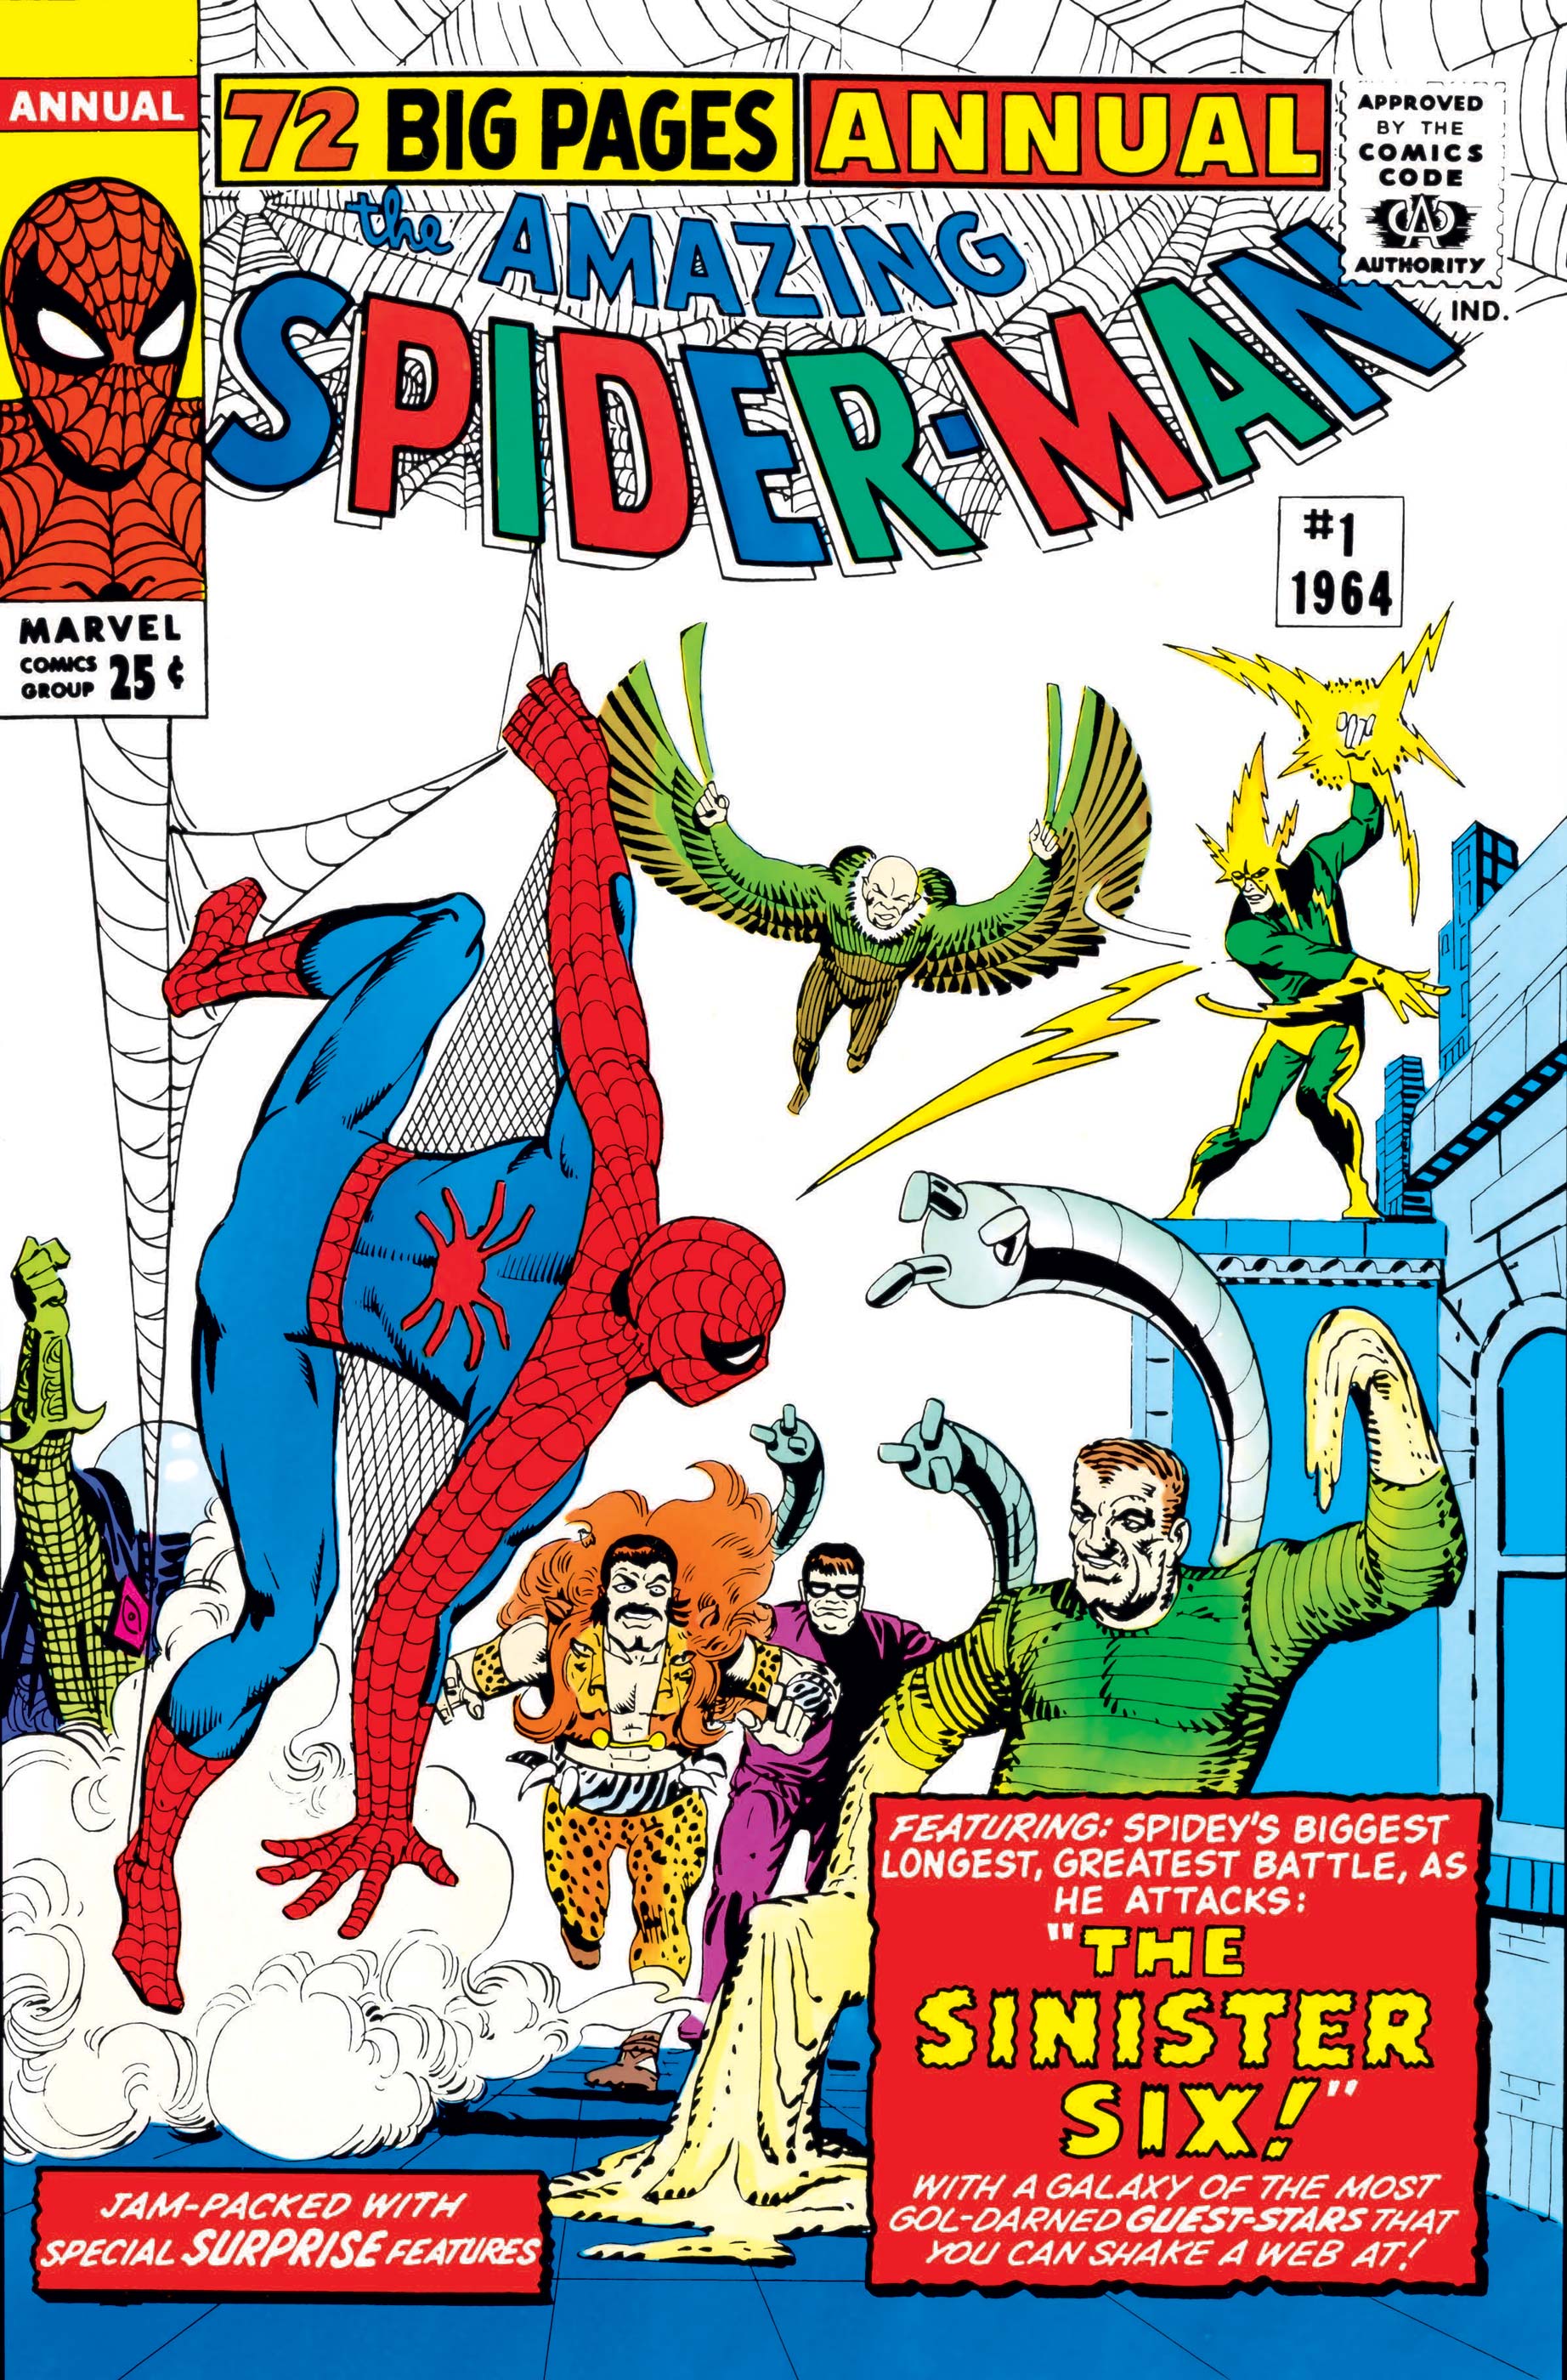 The Amazing Spider-Man Omnibus 1 by Lee, Stan